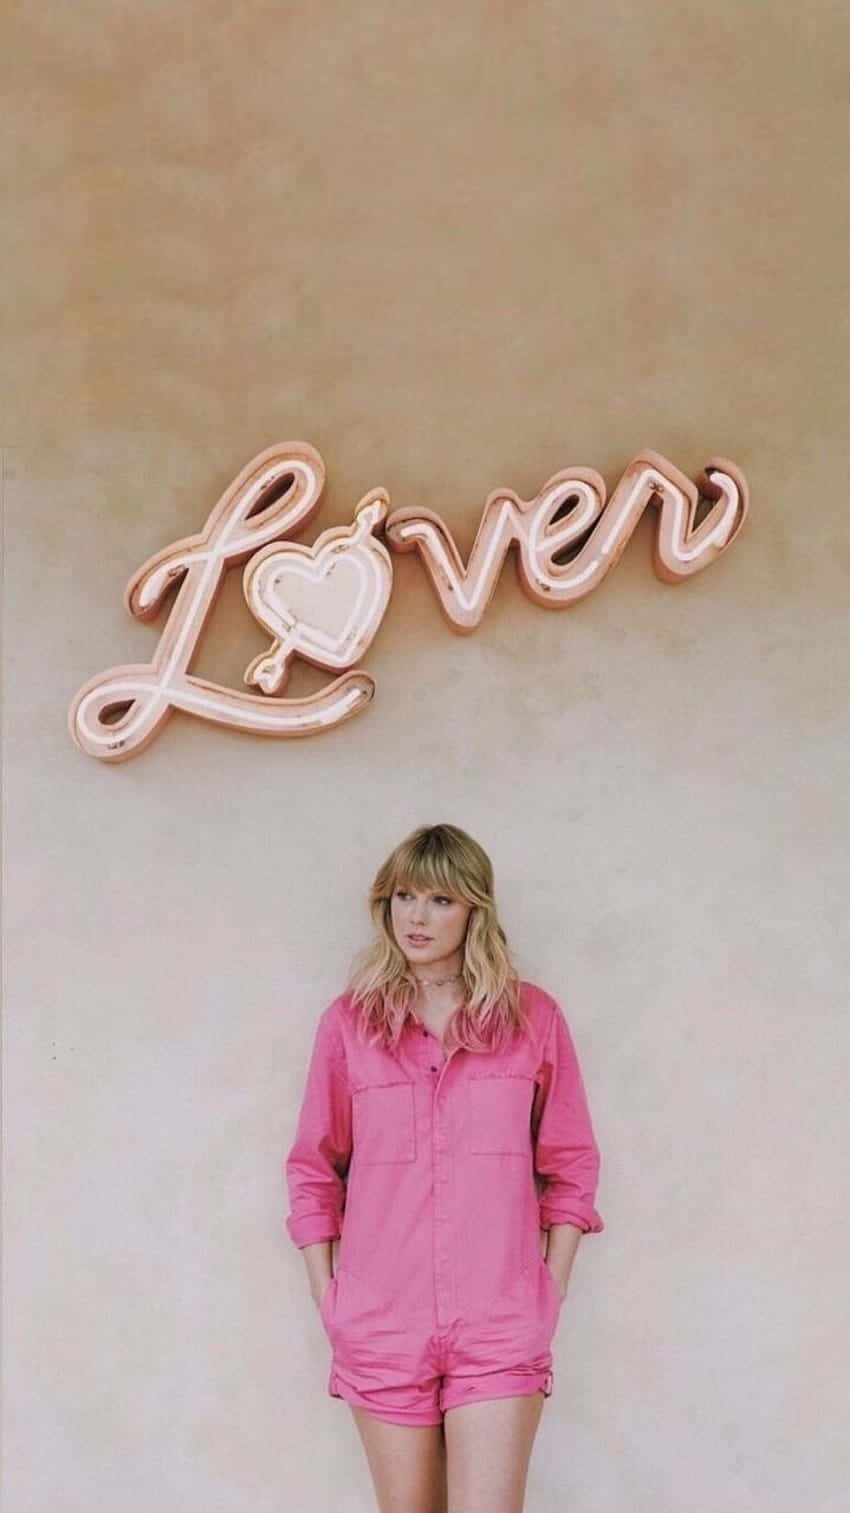 Pink Lover Neon Signwith Woman Wallpaper